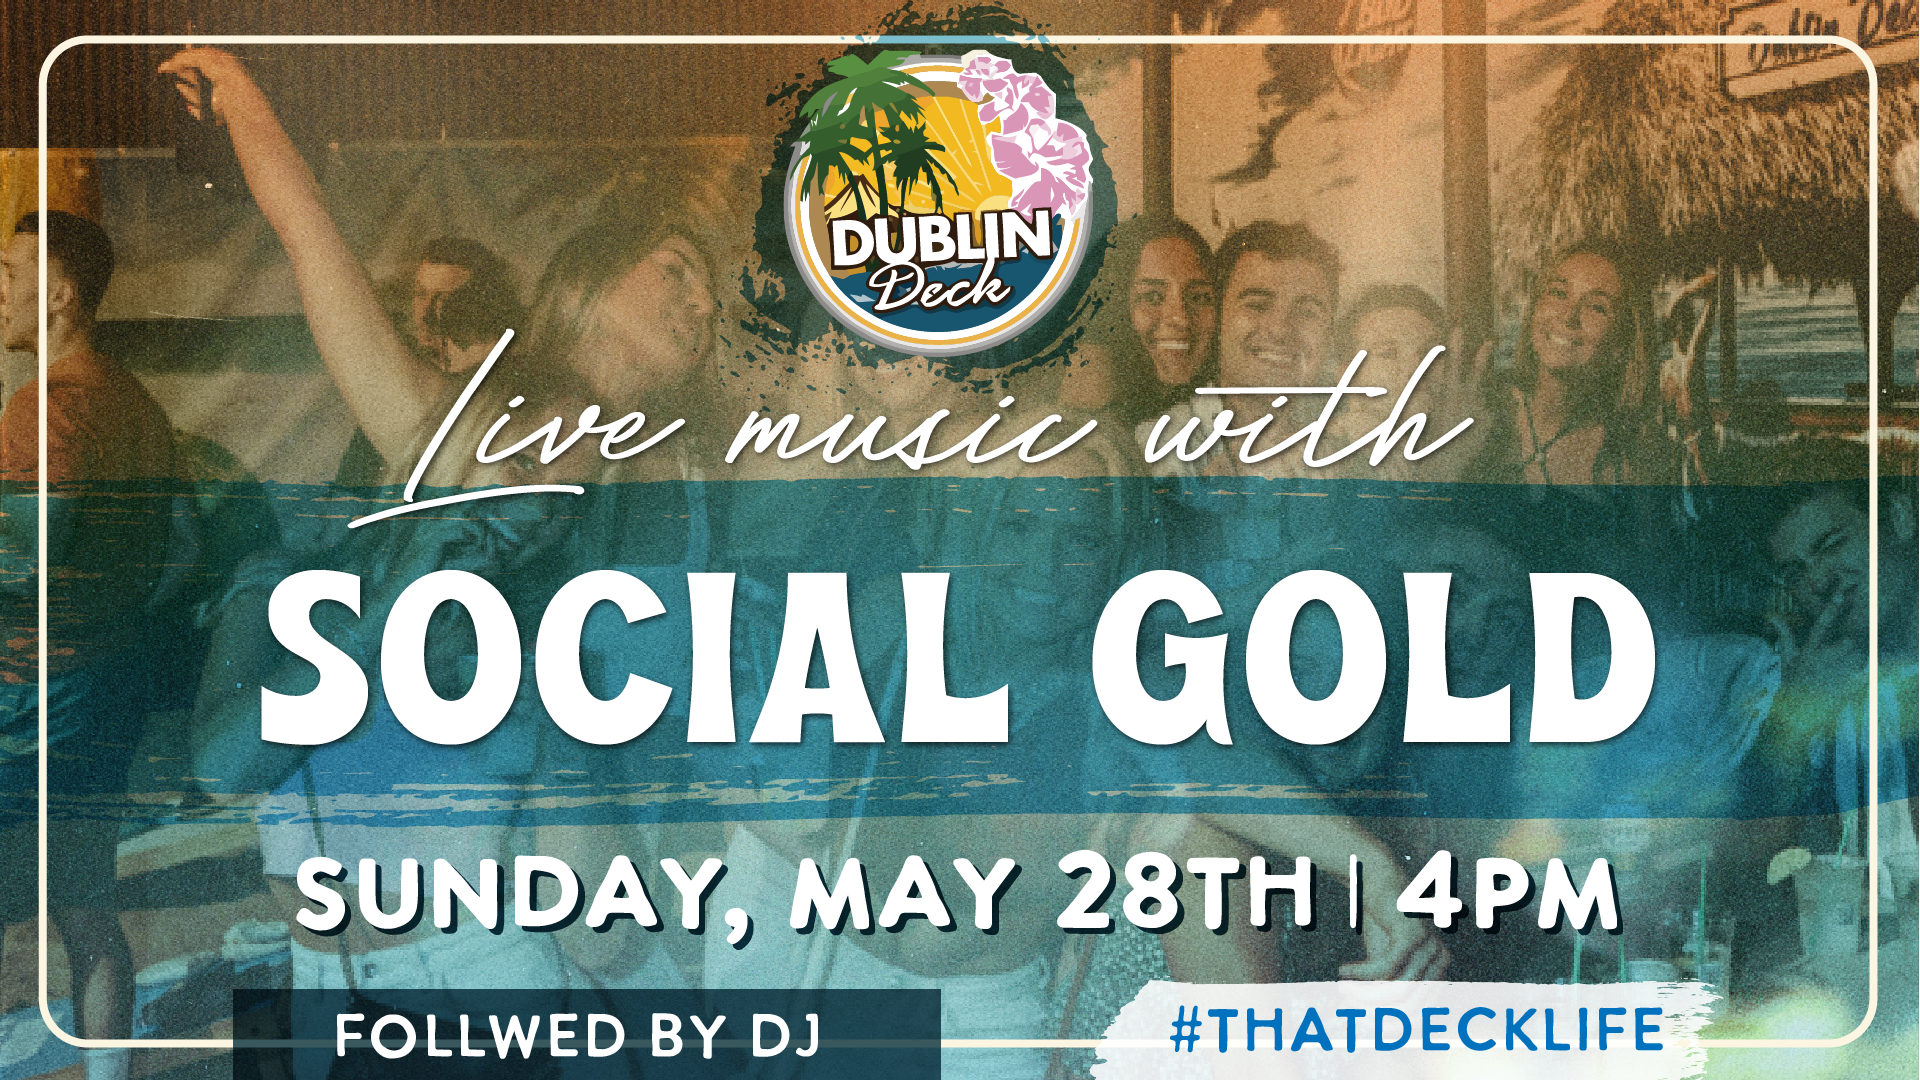 It's a 3-day weekend - Let's keep the fun going! Catch Social Gold performing live with us at 4PM